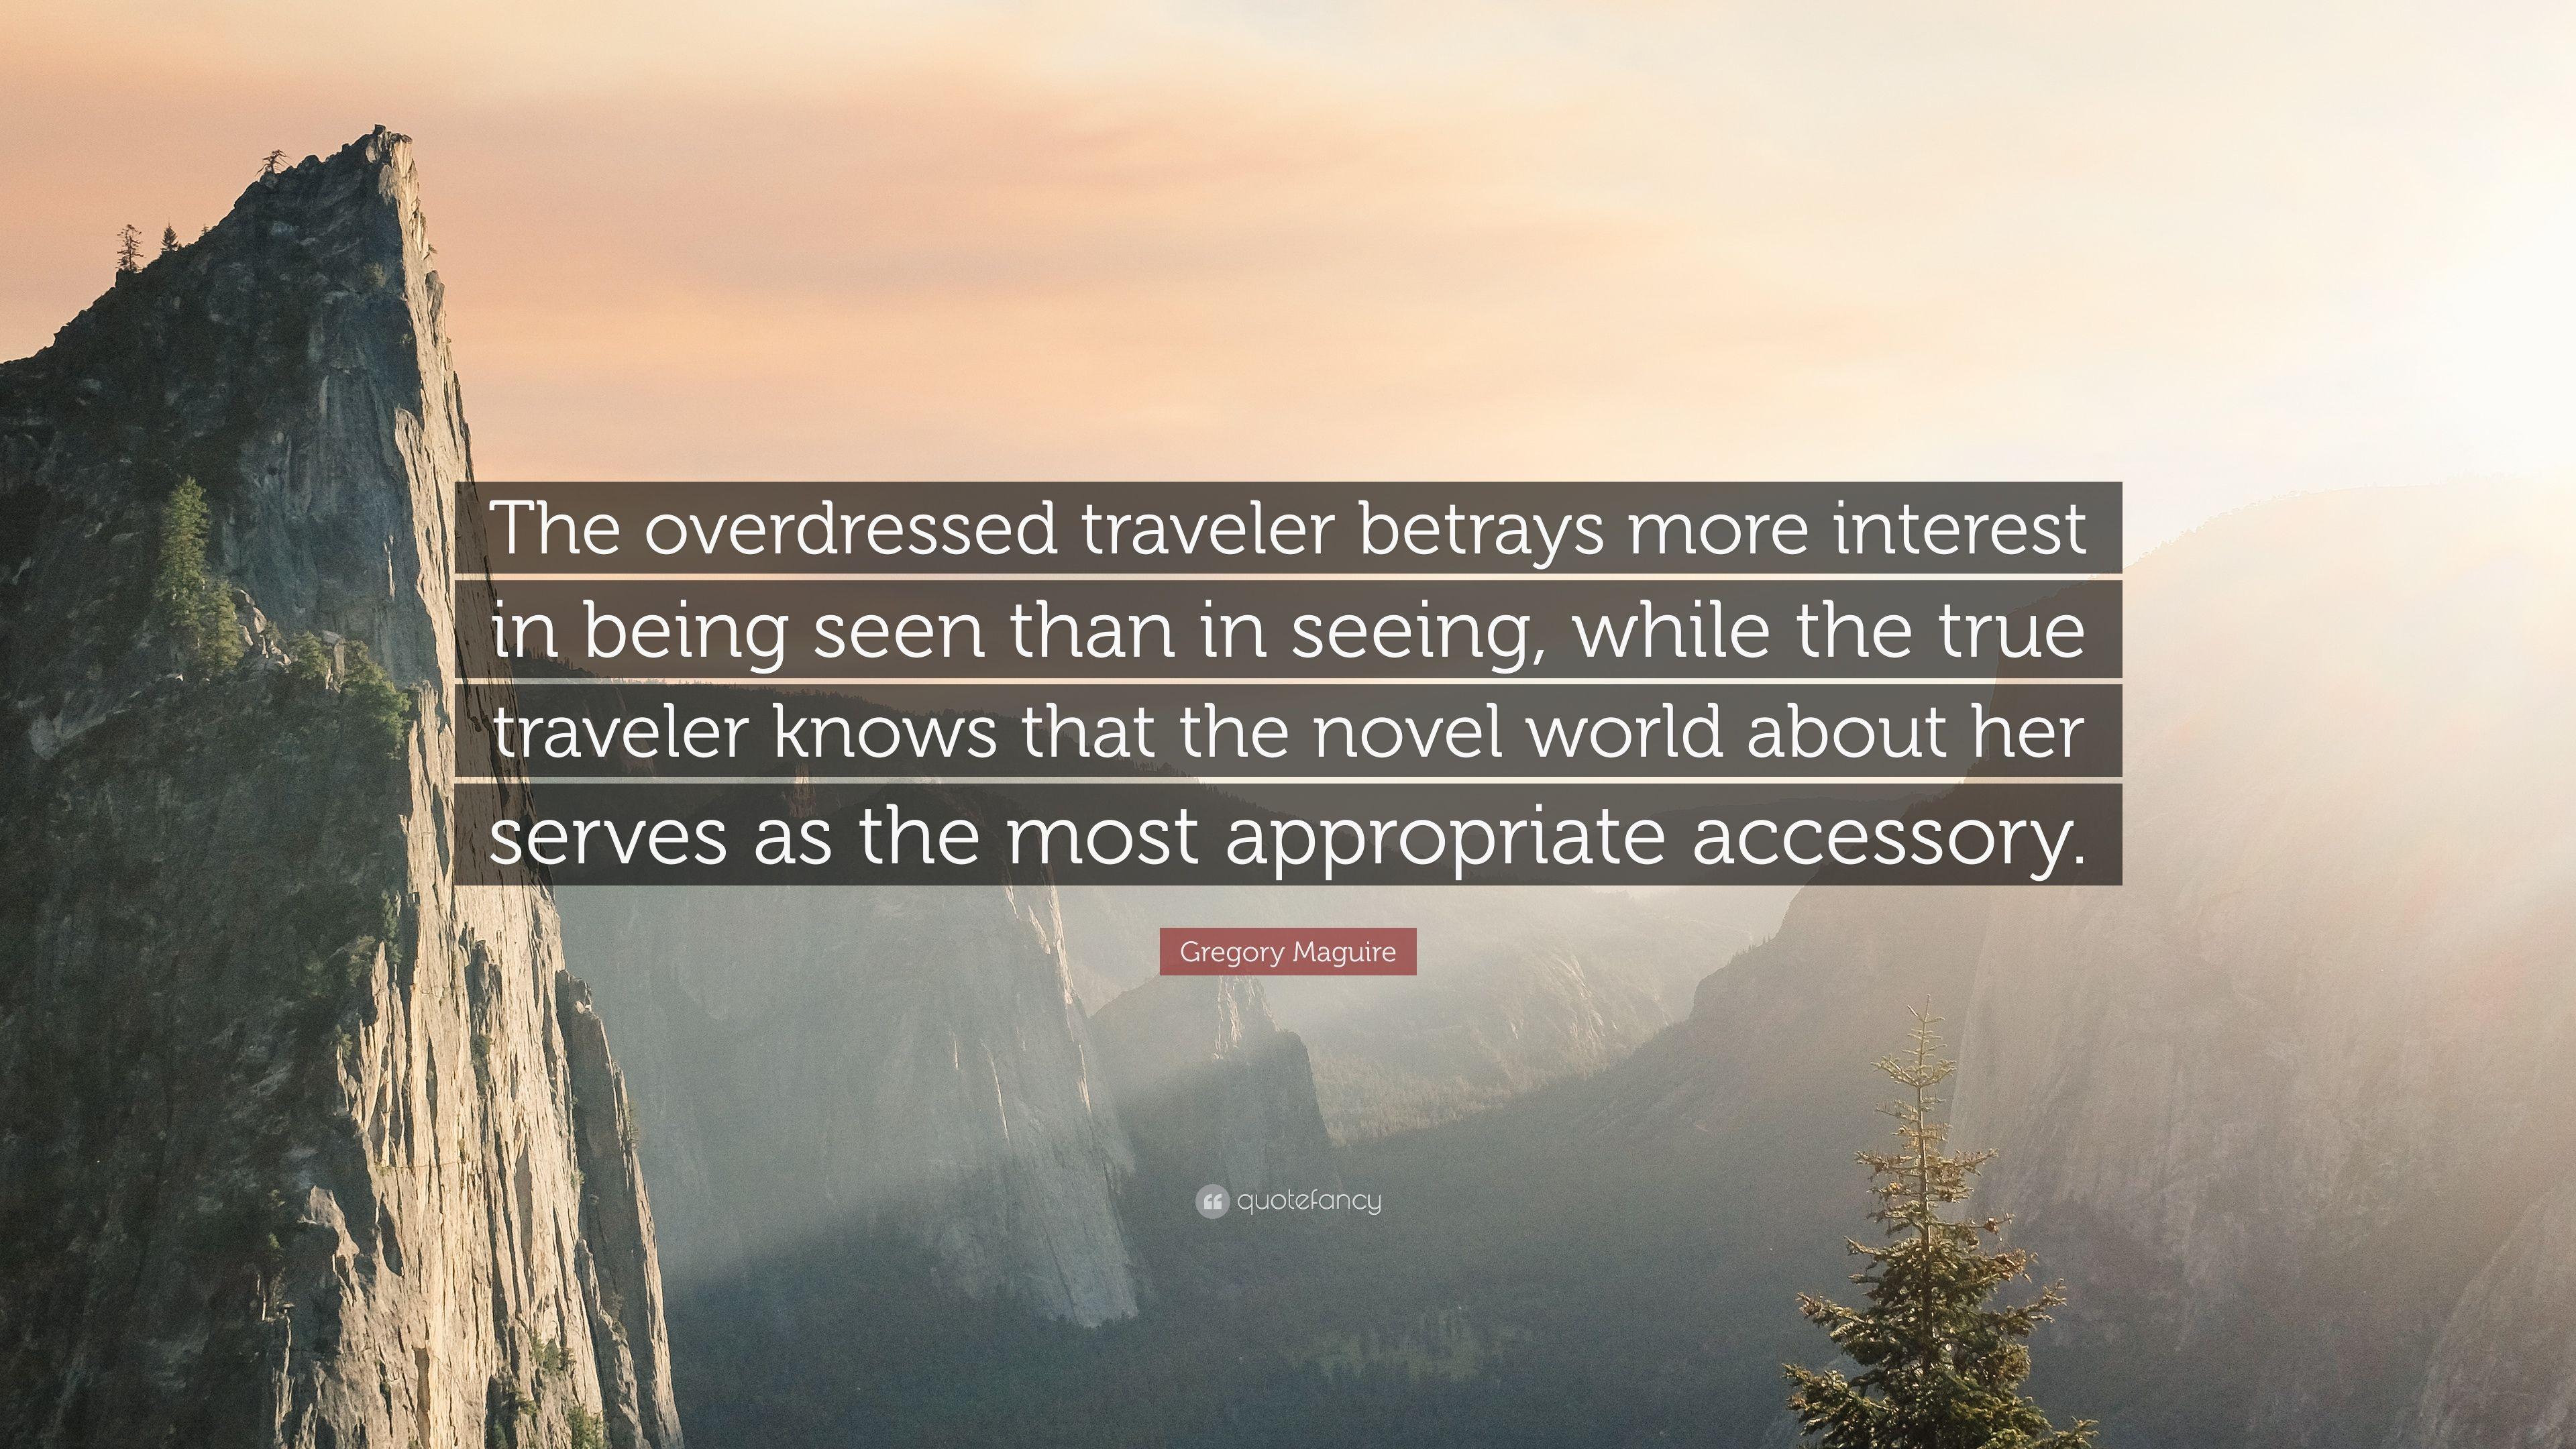 Gregory Maguire Quote: “The overdressed traveler betrays more